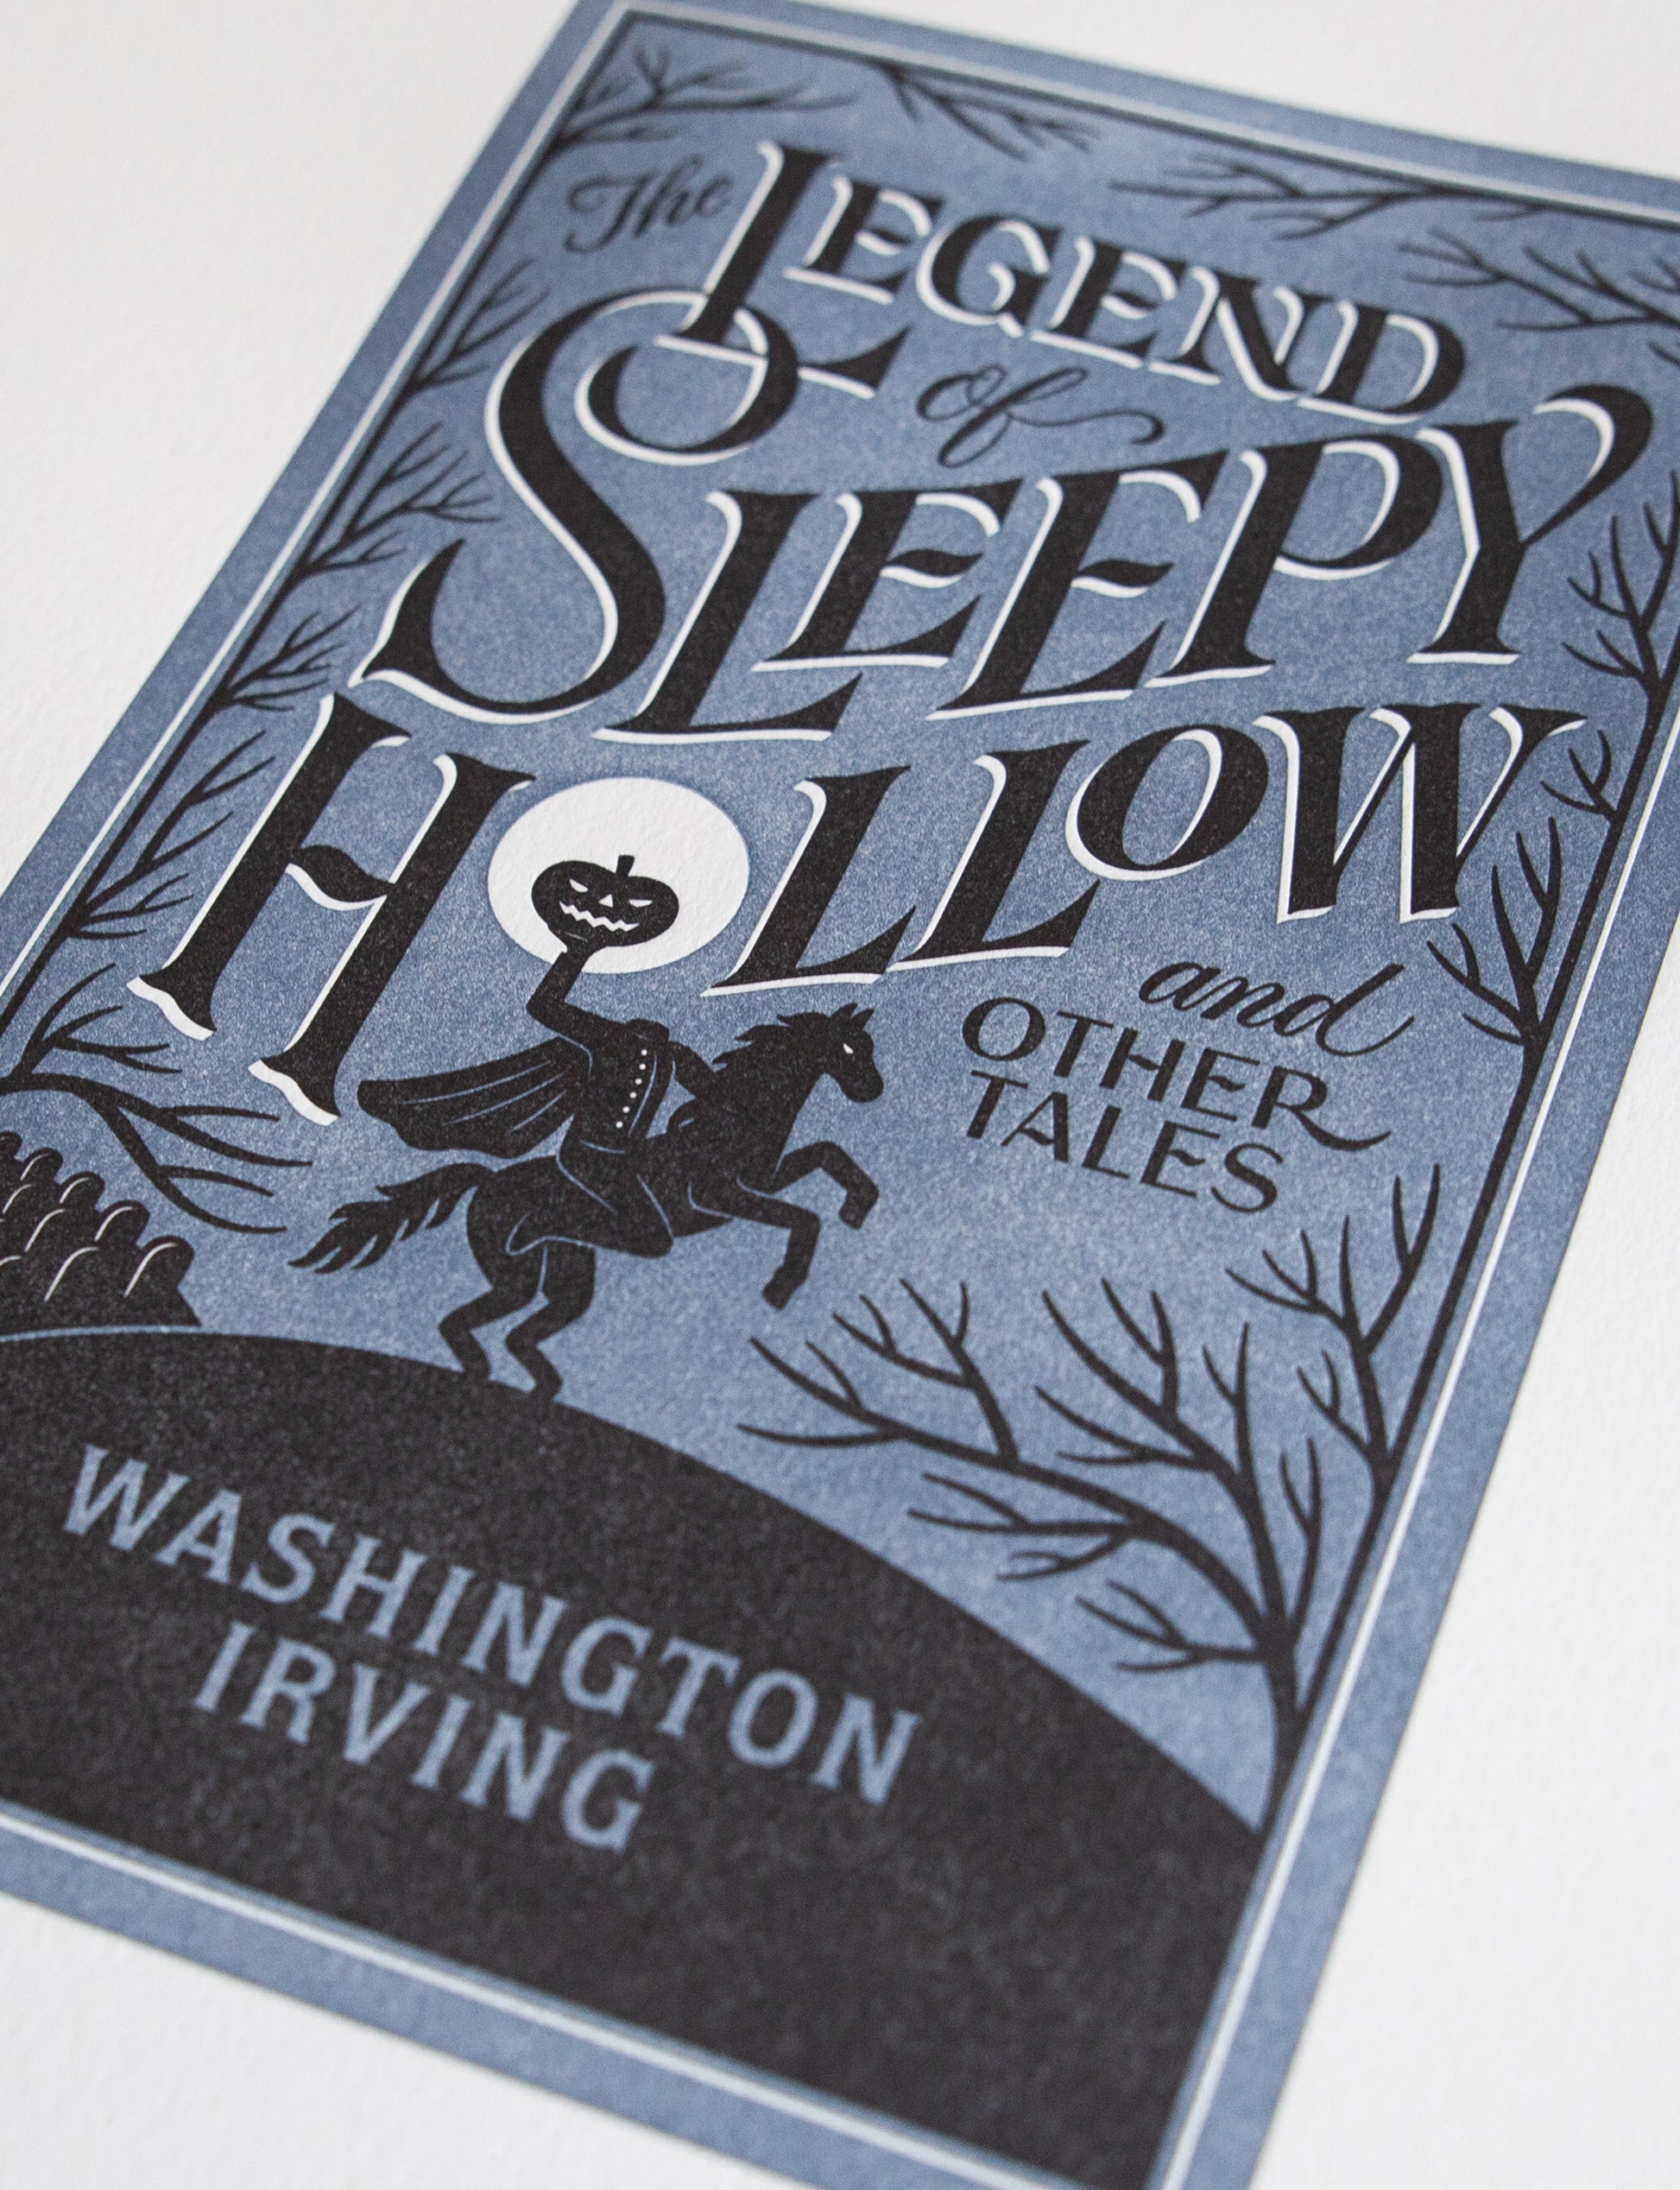 Close-up of a 2-color letterpress print in blue and black. Printed artwork is an illustrated book cover of The Legend of Sleepy Hollow including custom hand lettering.